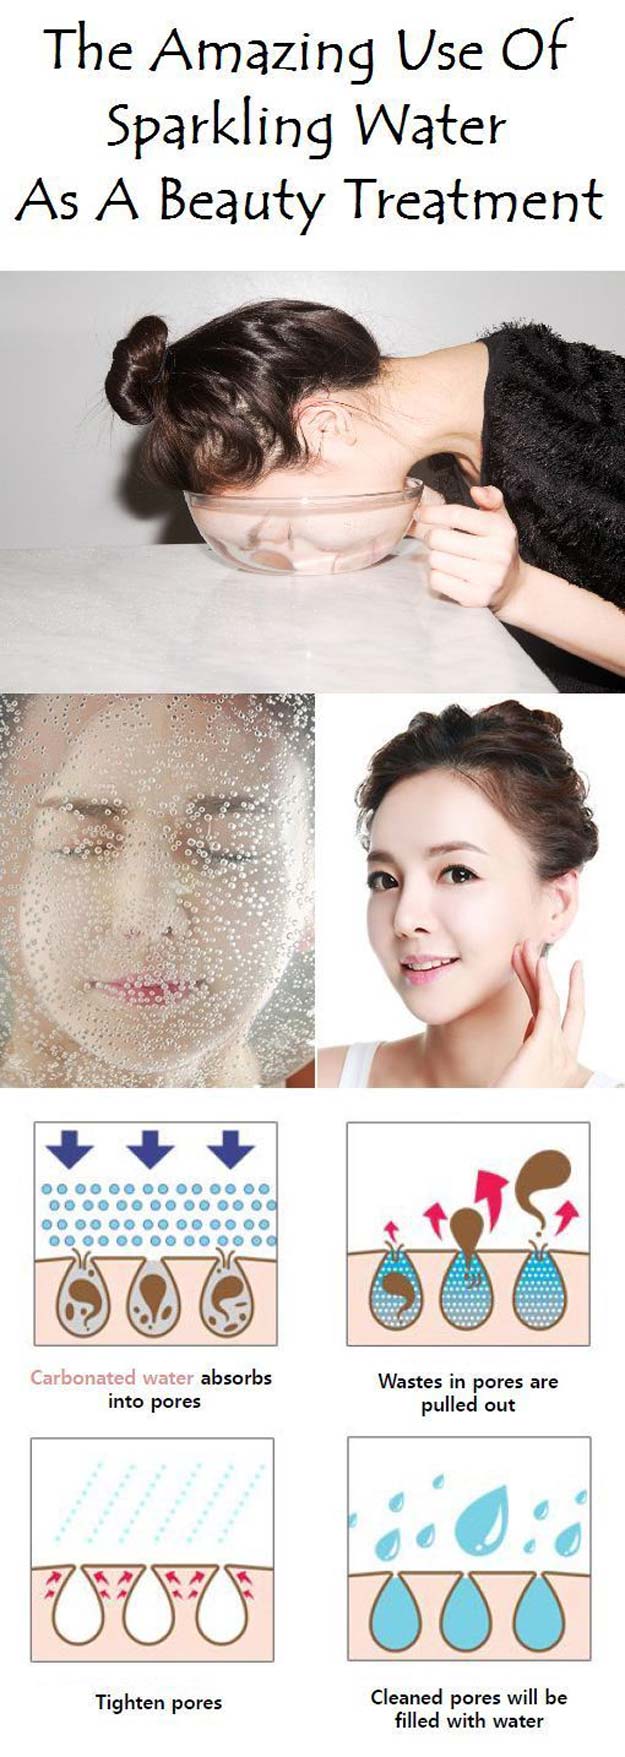  Best Beauty Hacks - Wash Face with Sparkling Water - Easy Makeup Tutorials and Makeup Ideas for Teens, Beginners, Women, Teenagers - Cool Tips and Tricks for Mascara, Lipstick, Foundation, Hair, Blush, Eyeshadow, Eyebrows and Eyes - Step by Step Tutorials and How To #beautyhacks #beautyideas #makeuptutorial #makeuphakcs #makeup #hair #teens